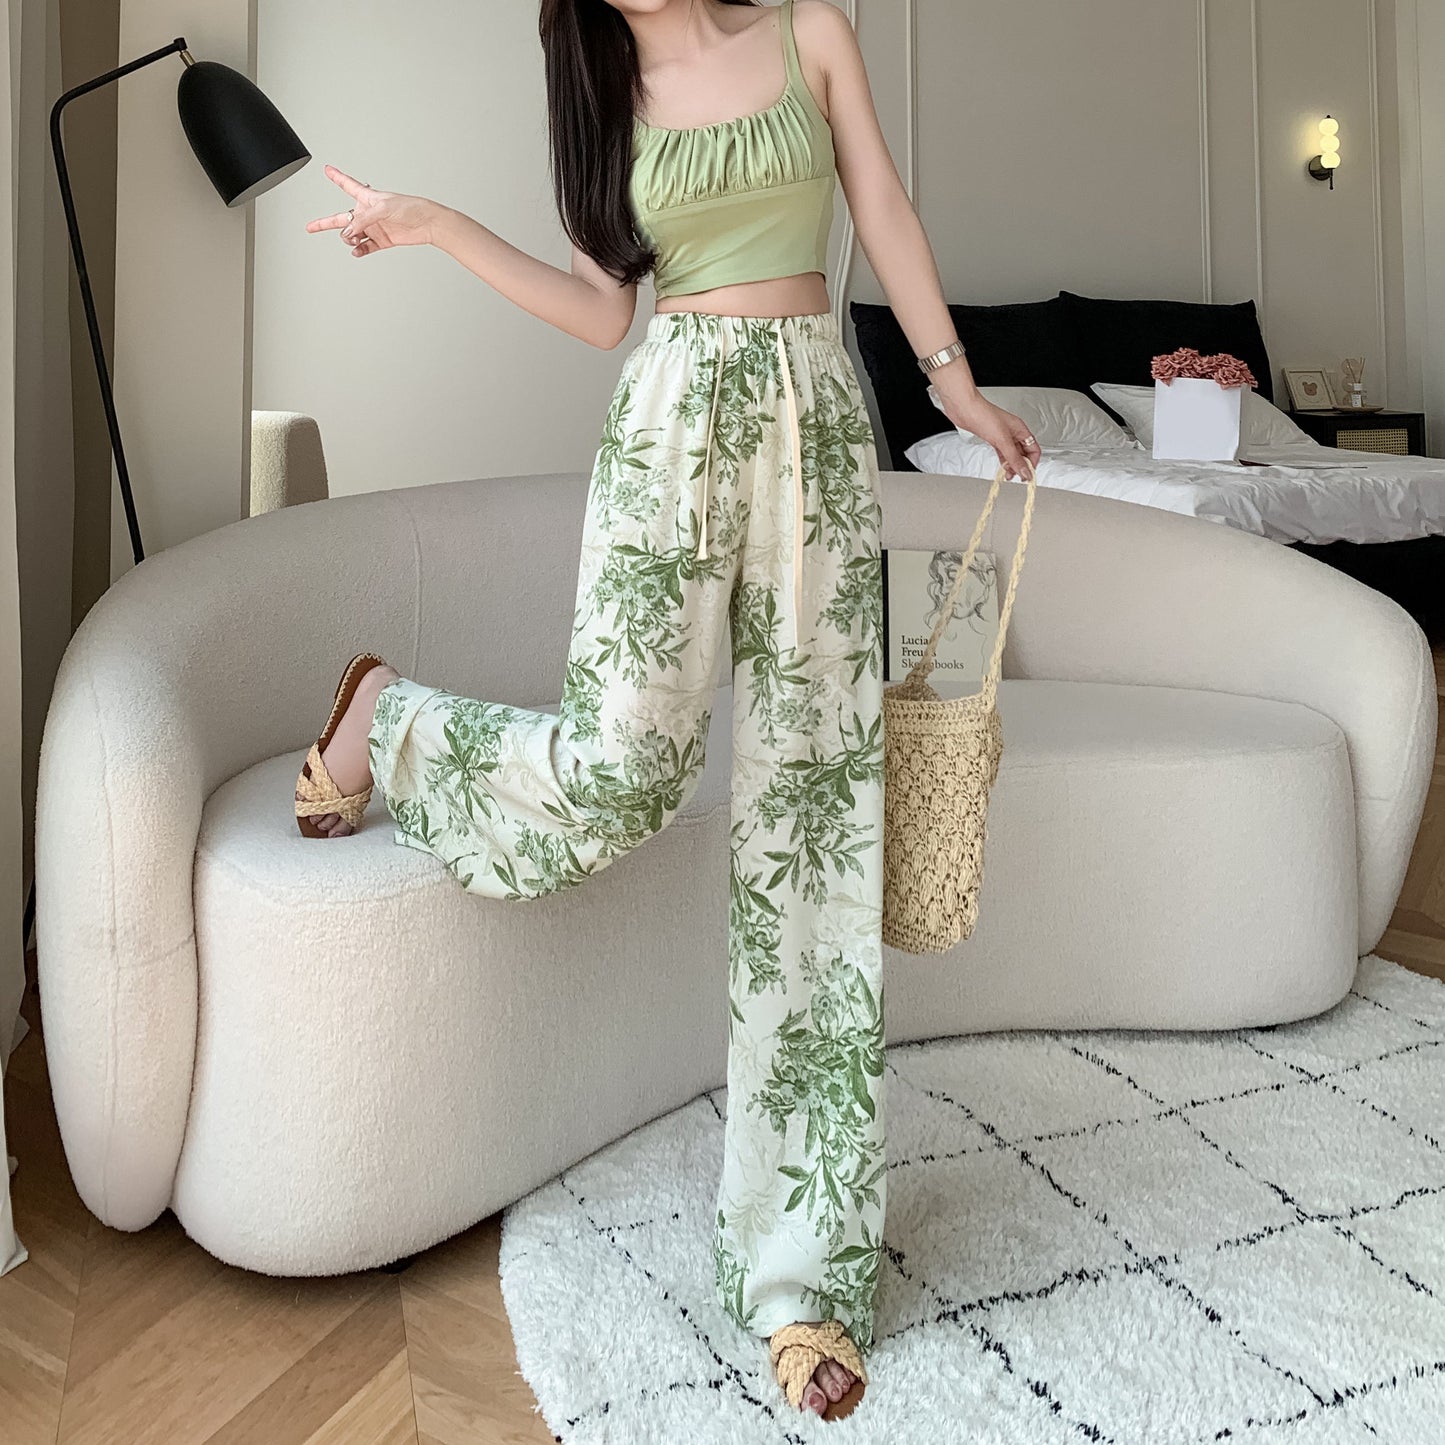 Printed High-Waisted Straight Leg Casual Slimming Look Silky Pants